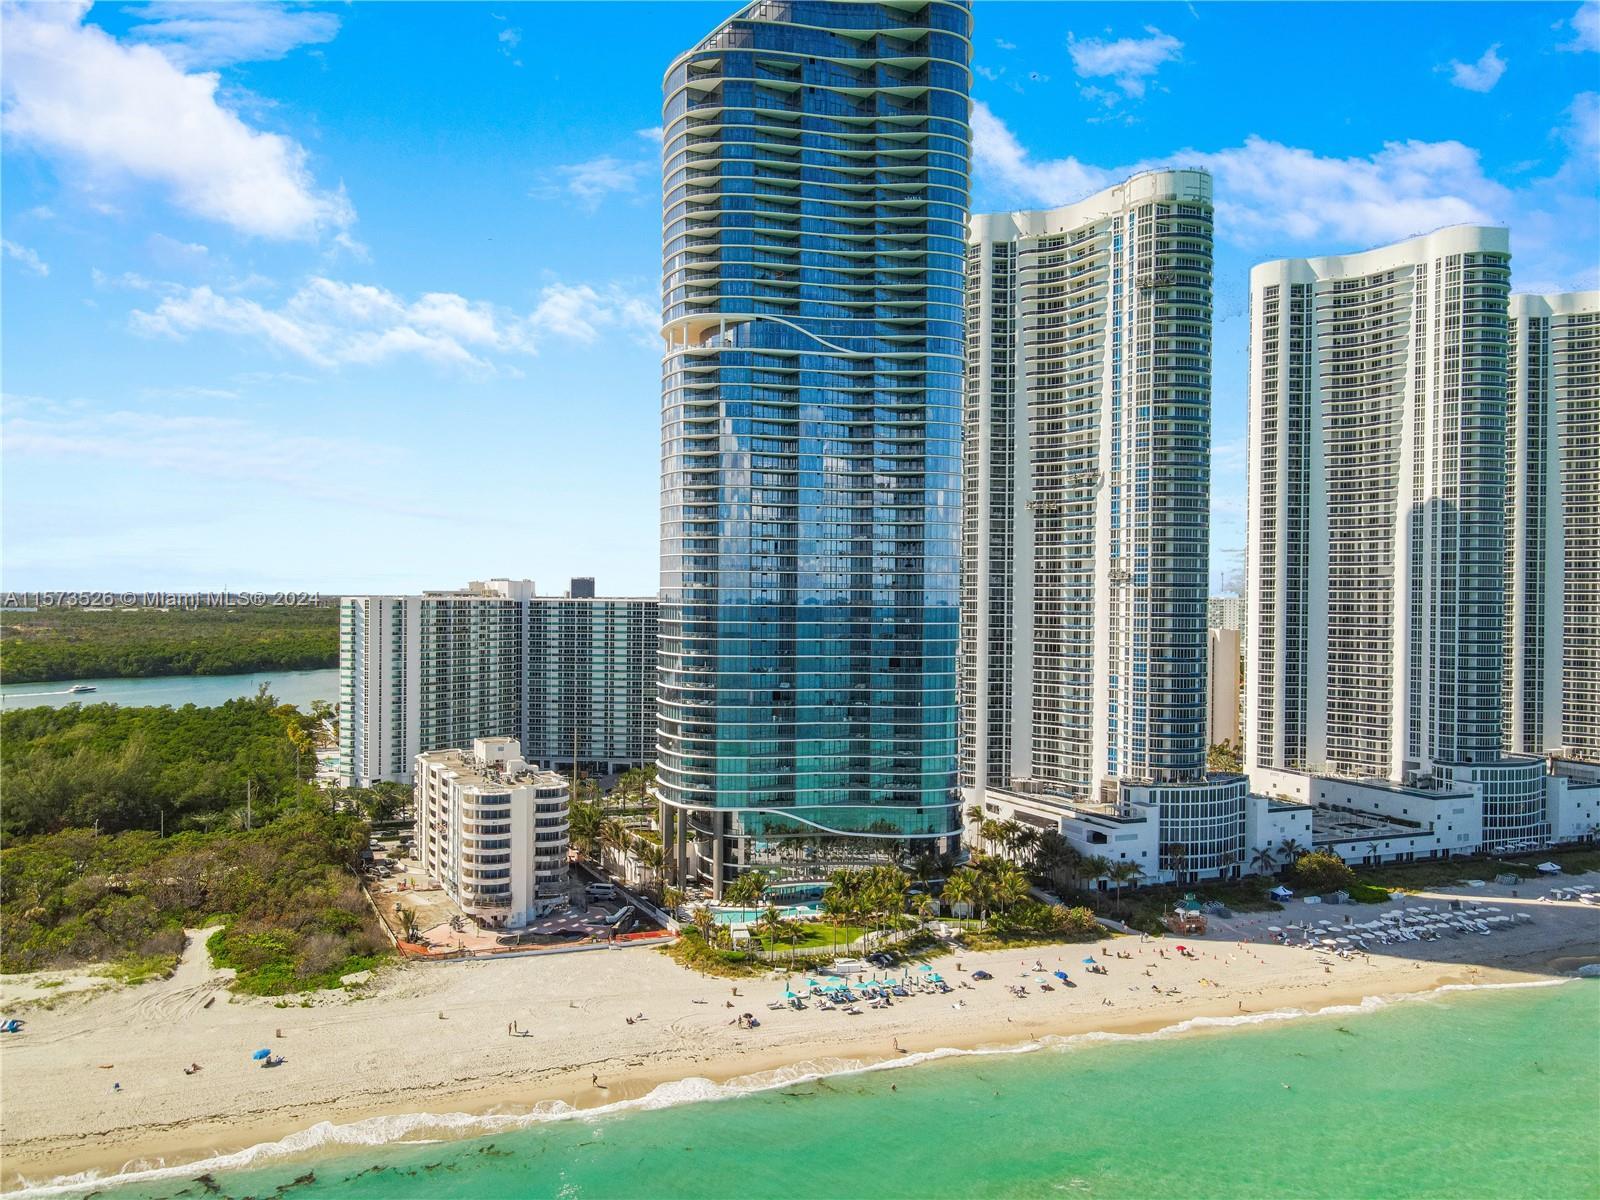 Photo of 15701 Collins Ave #2804 in Sunny Isles Beach, FL